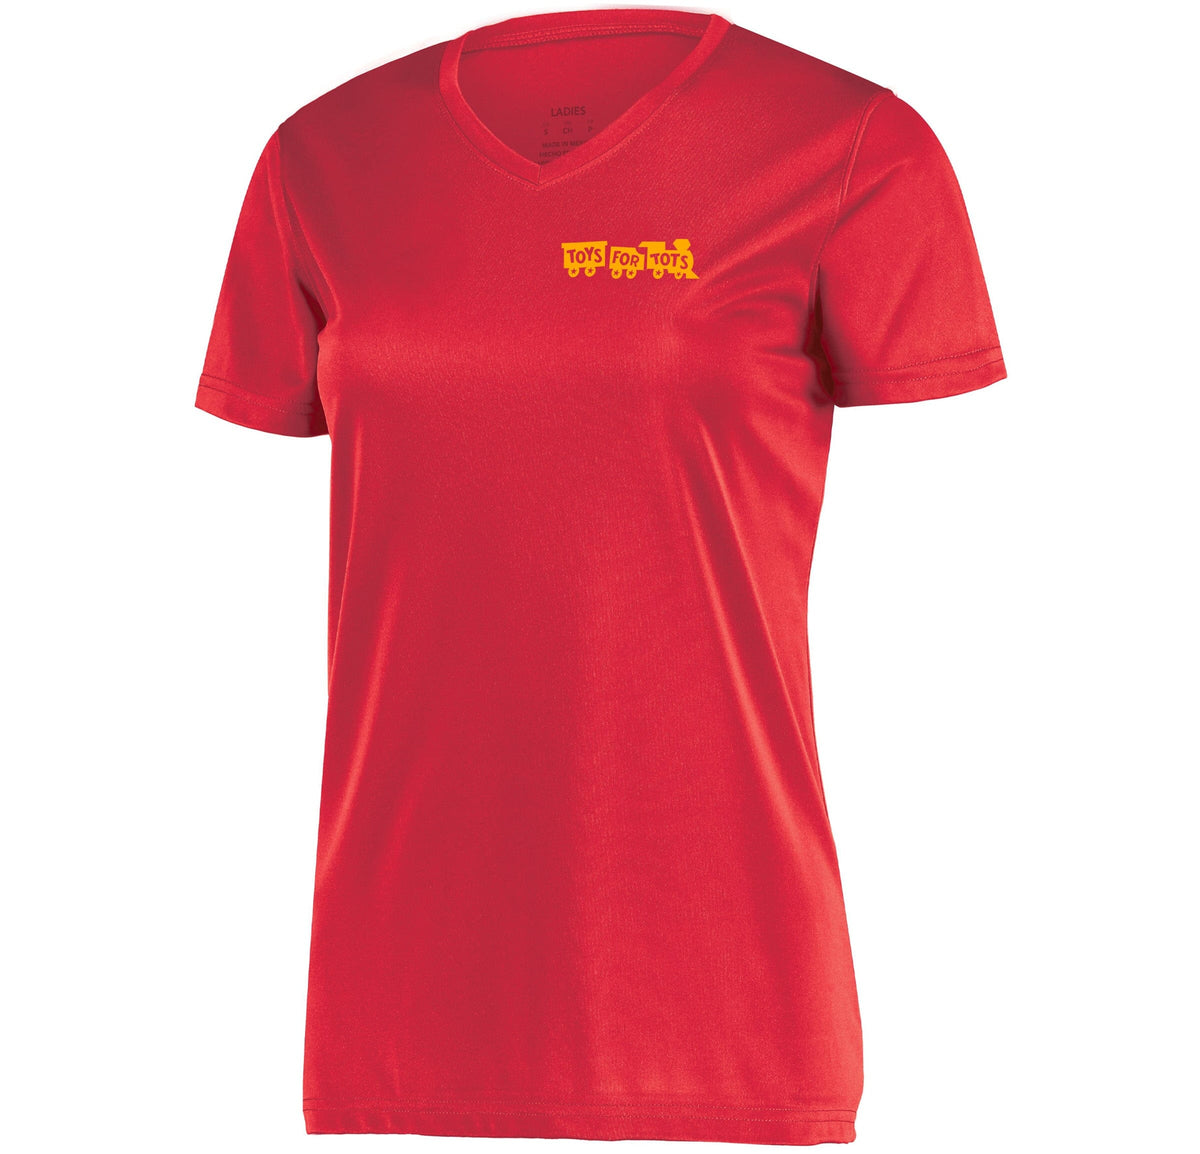 Gold TFT Chest Seal Dri-Fit Performance Women's V-Neck T-Shirt TFT Shirt Marine Corps Direct S RED 